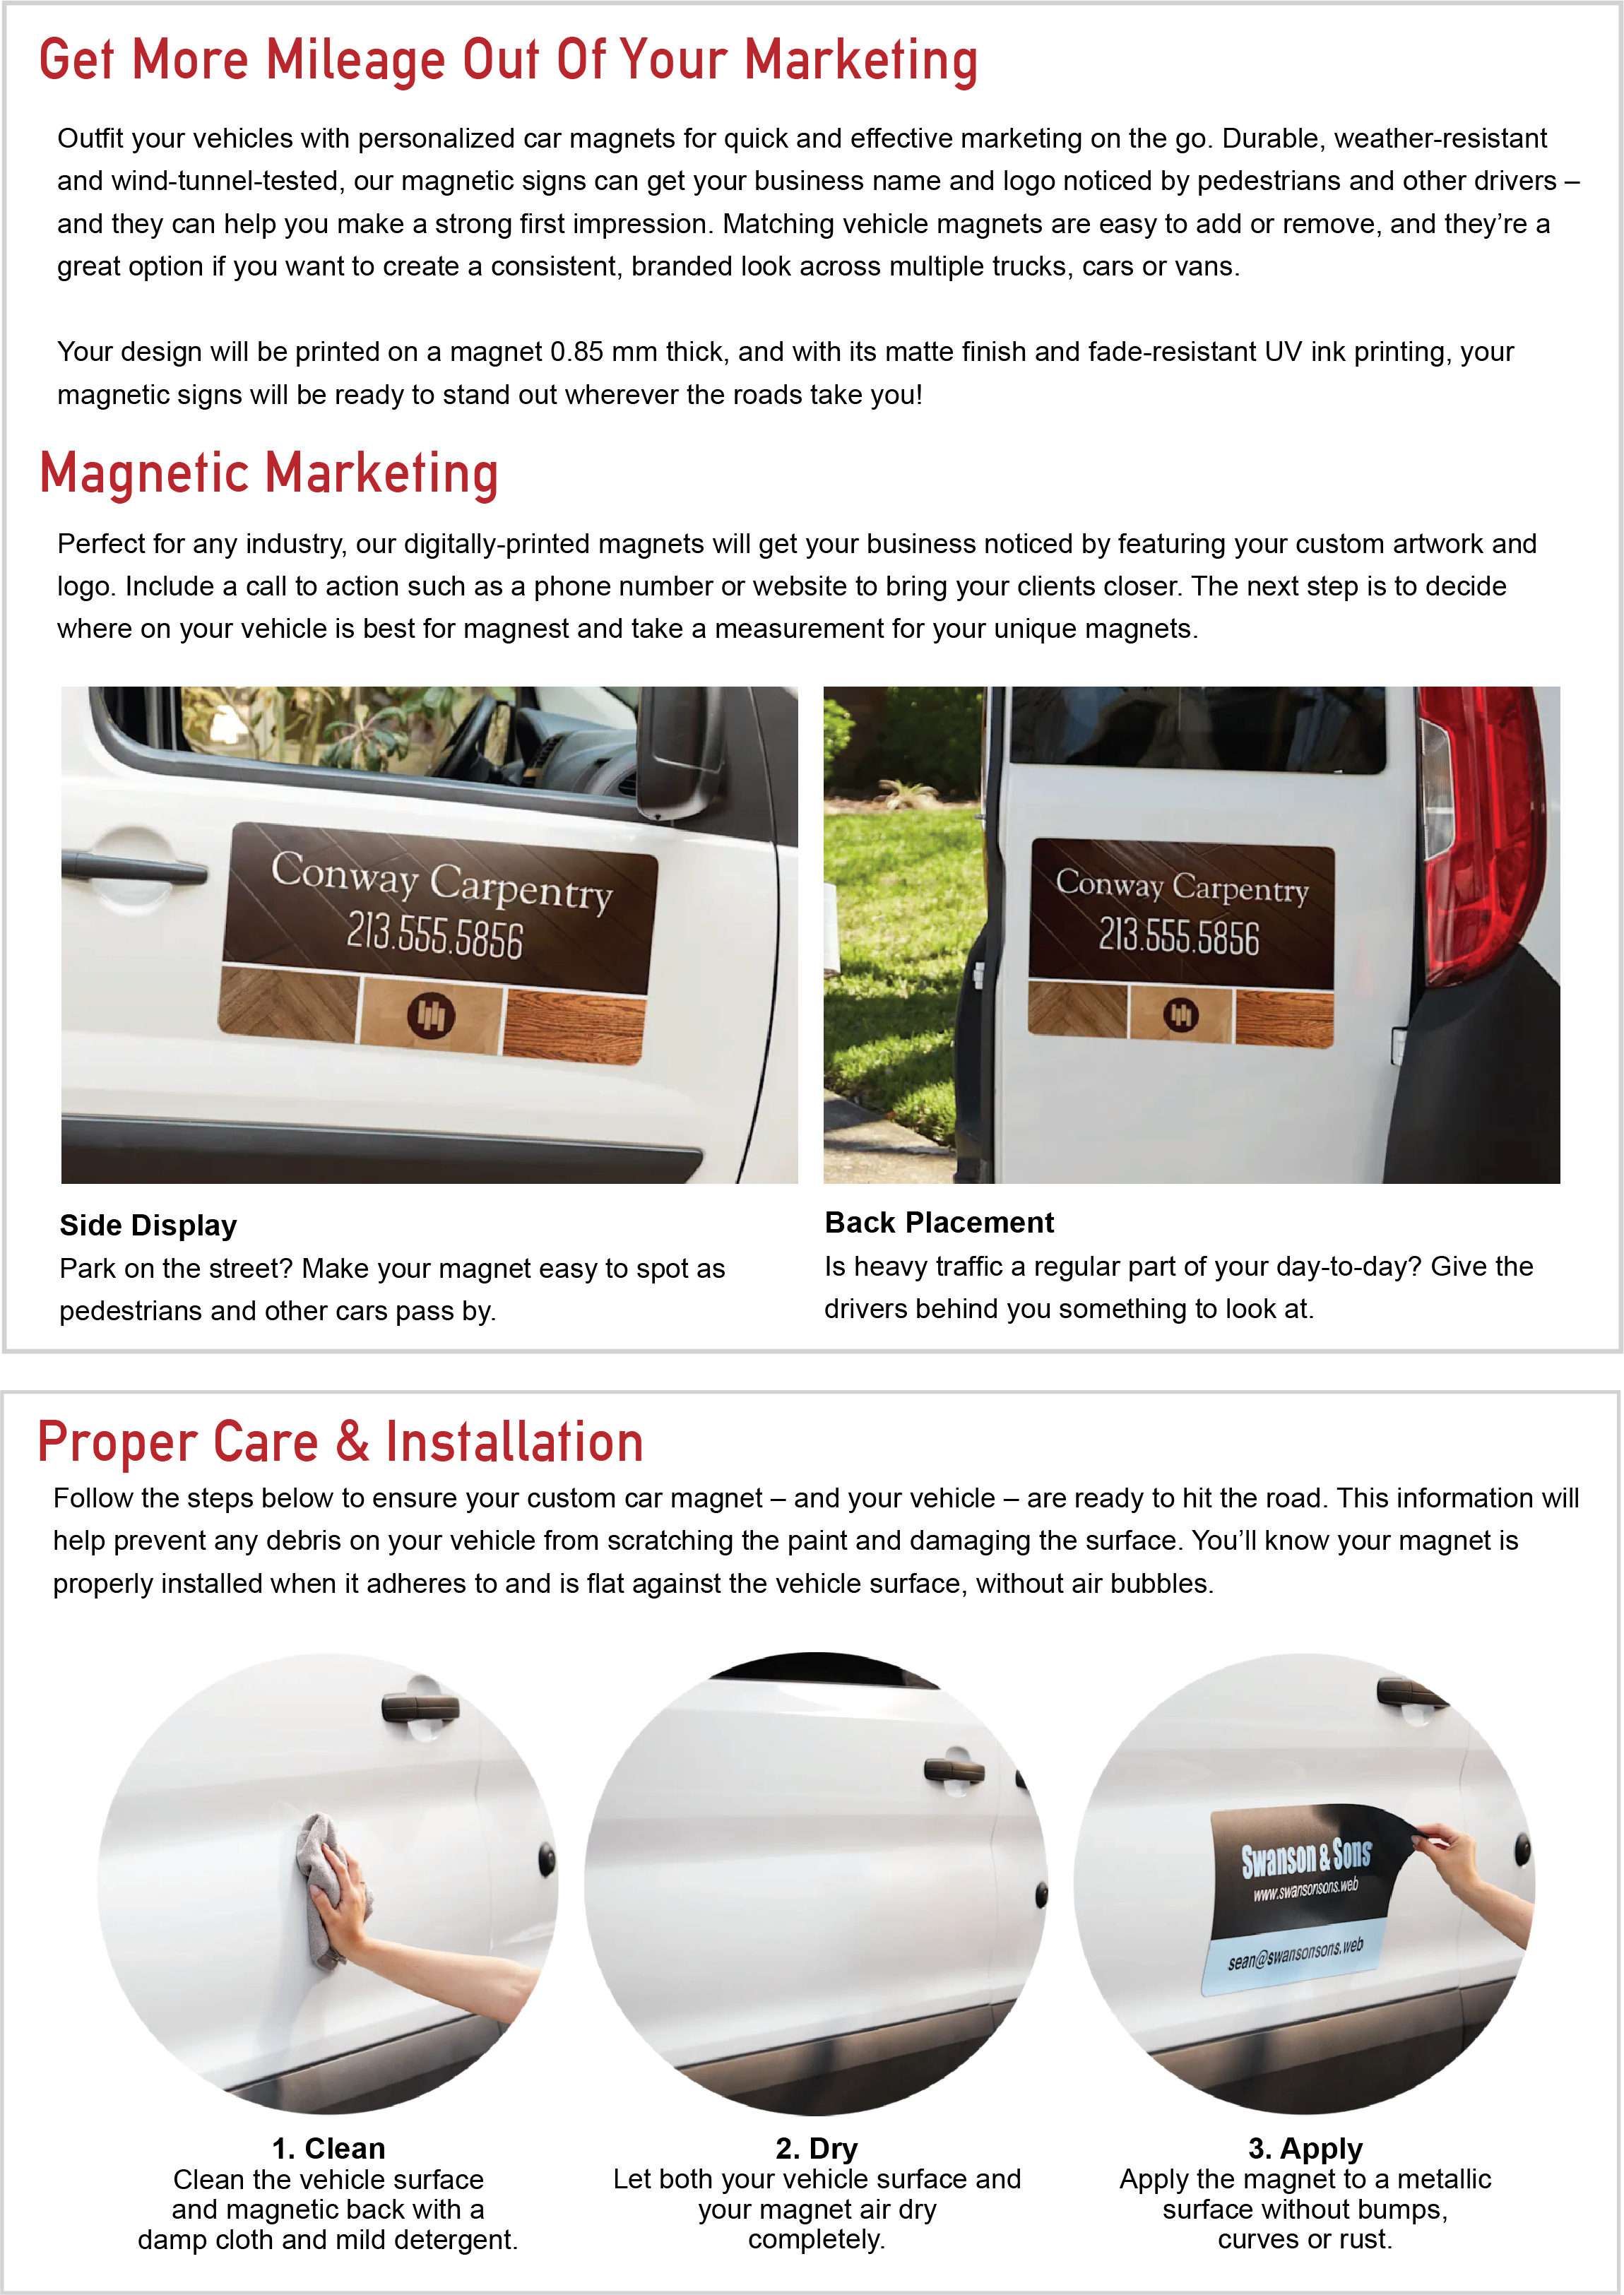 Signs By Web - Digital Print Vehicle Magnets